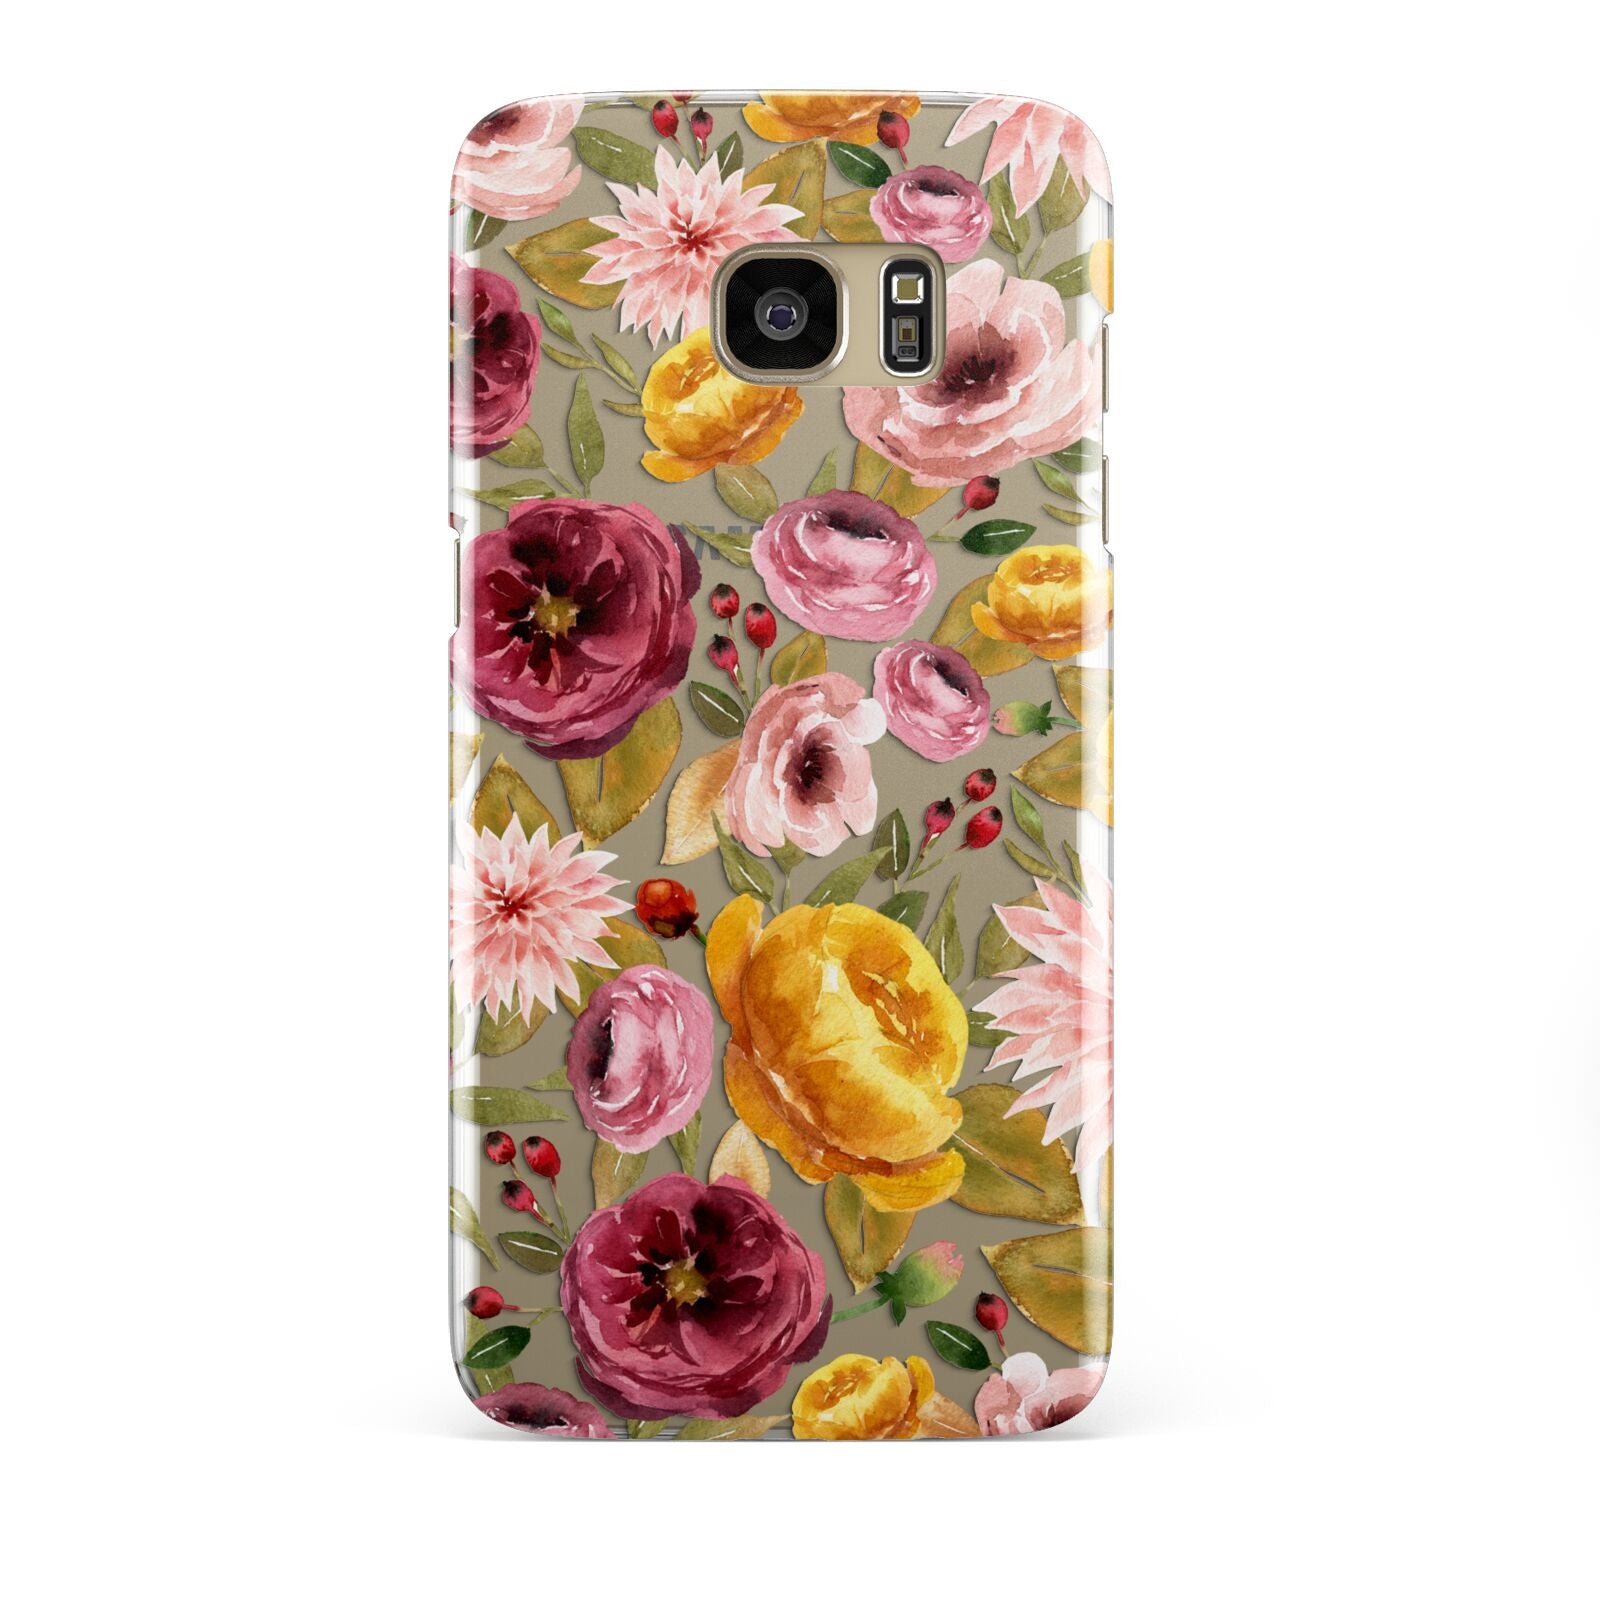 Pink and Mustard Floral Samsung Galaxy S7 Edge Case